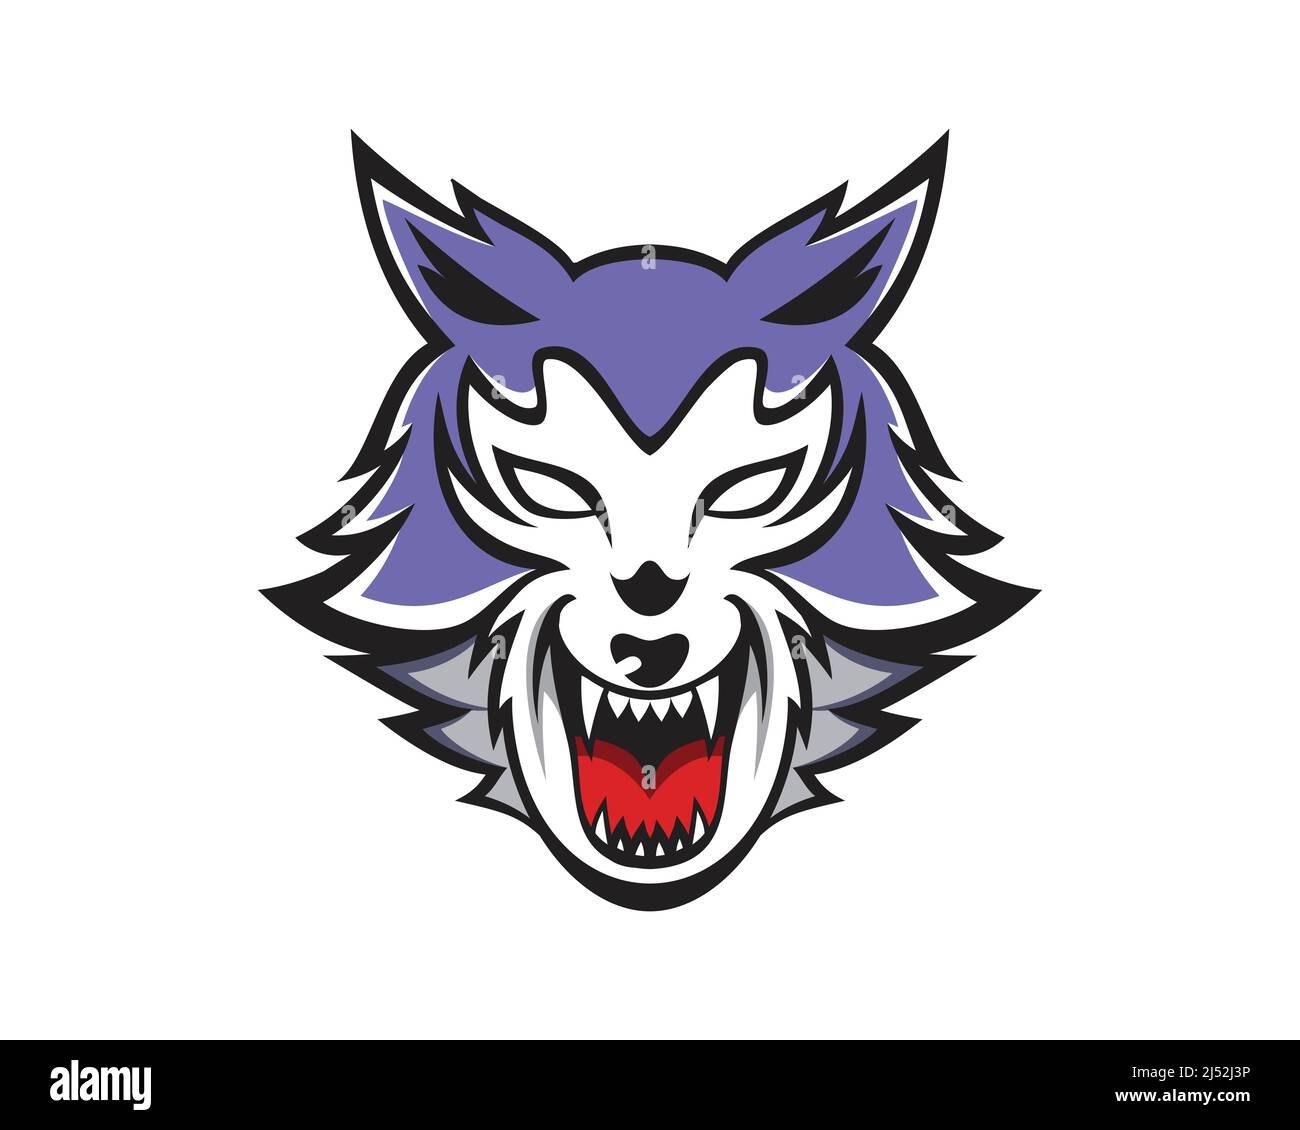 Angry Wolf Head Mascot Illustration Vector Stock Vector